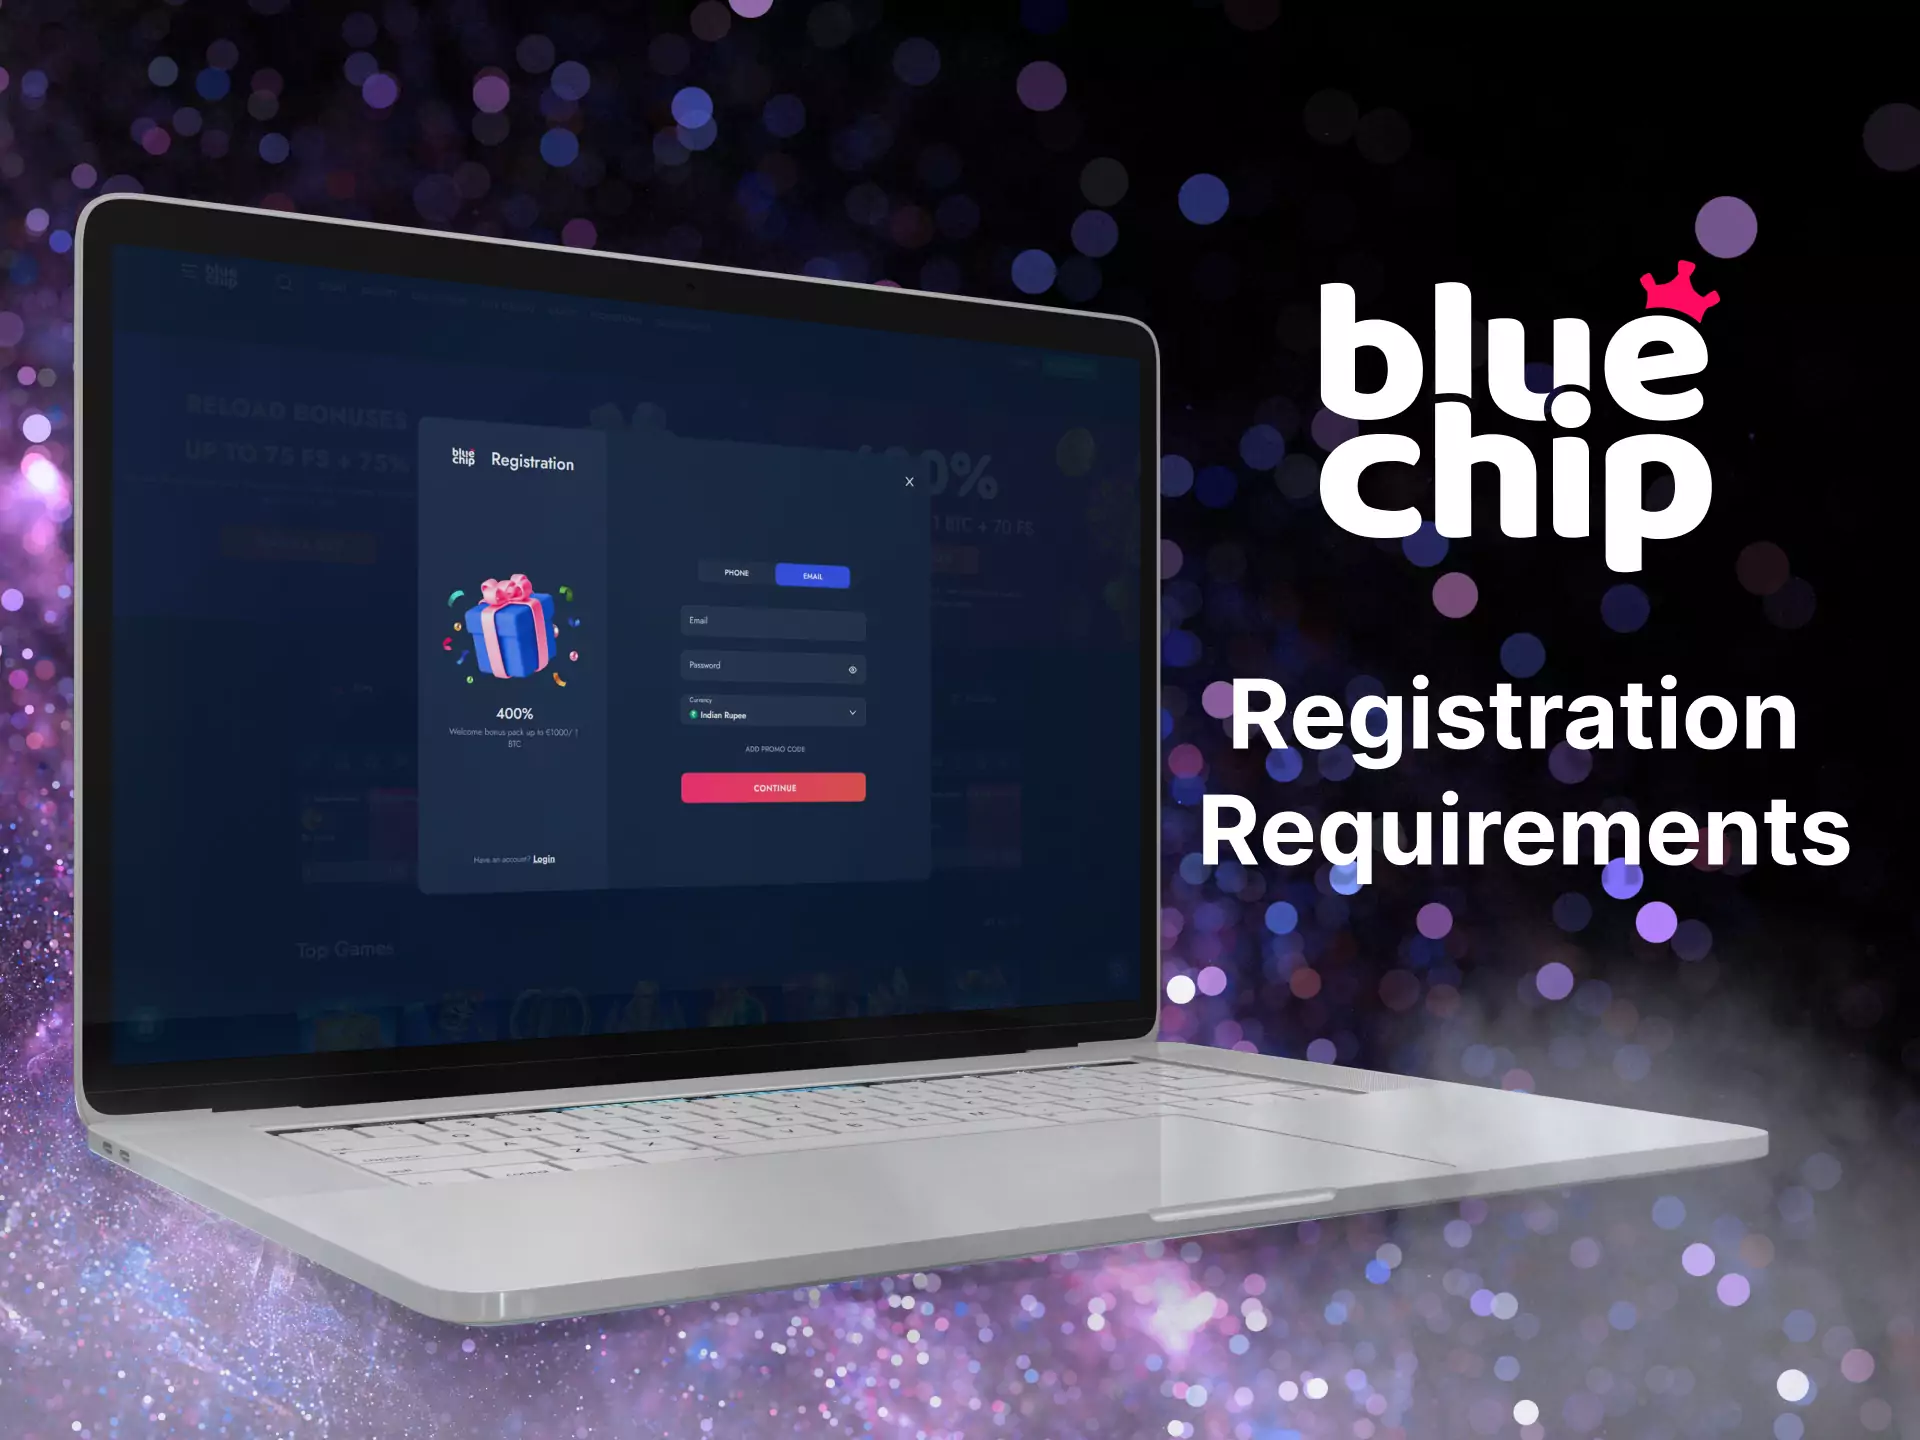 Check out the basic registration requirements for Bluechip.